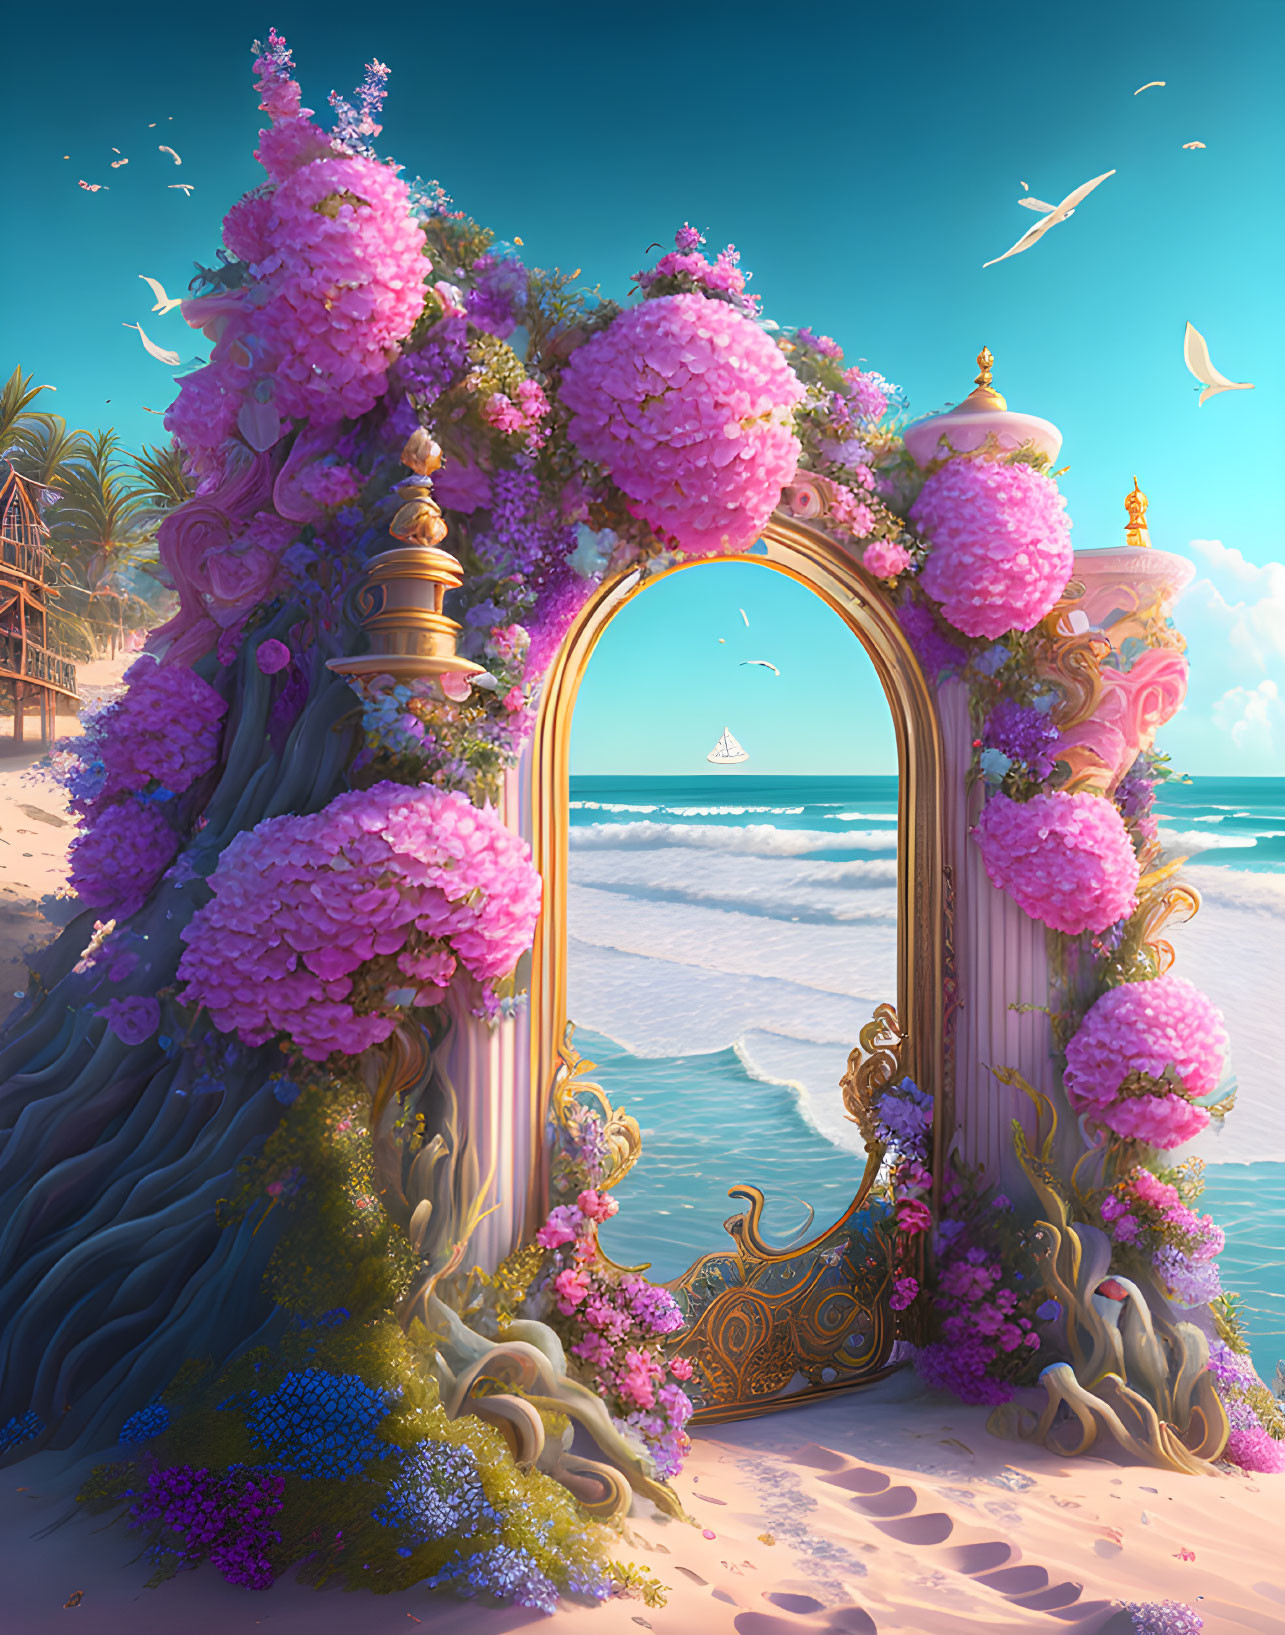 Golden archway with pink flowers by serene beach & sailboat.